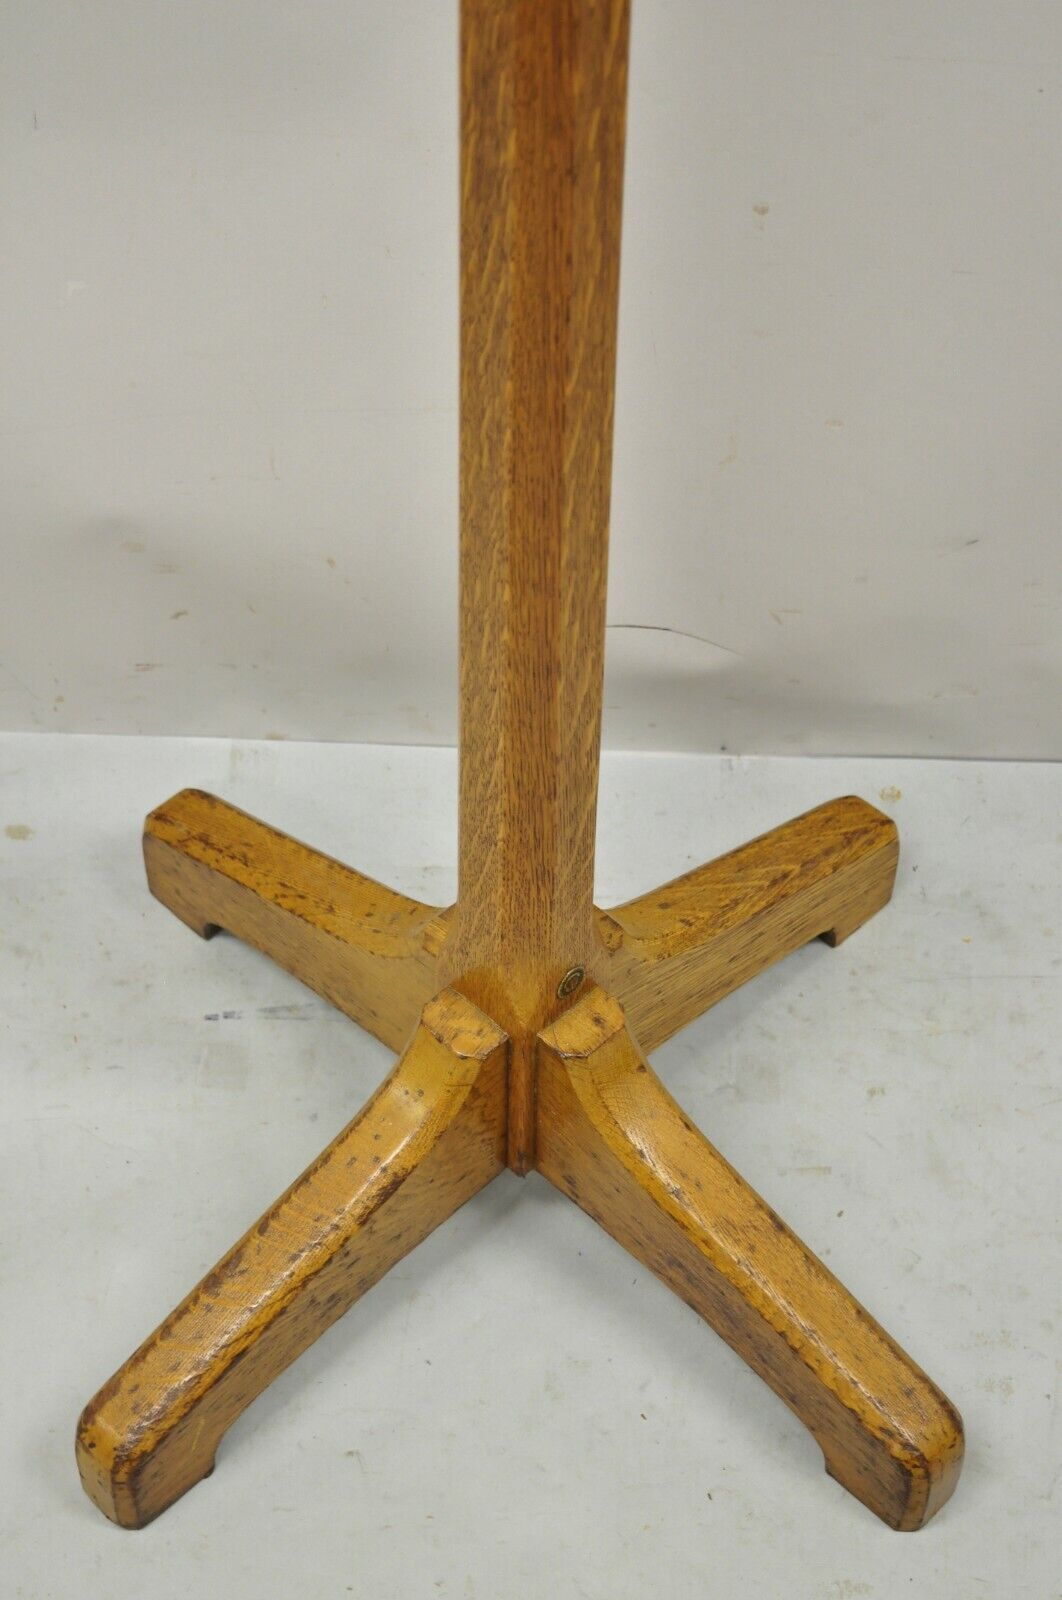 Antique BL Marble Chair Co. Oak Wood Revolving Arts & Crafts Coat Tree Stand